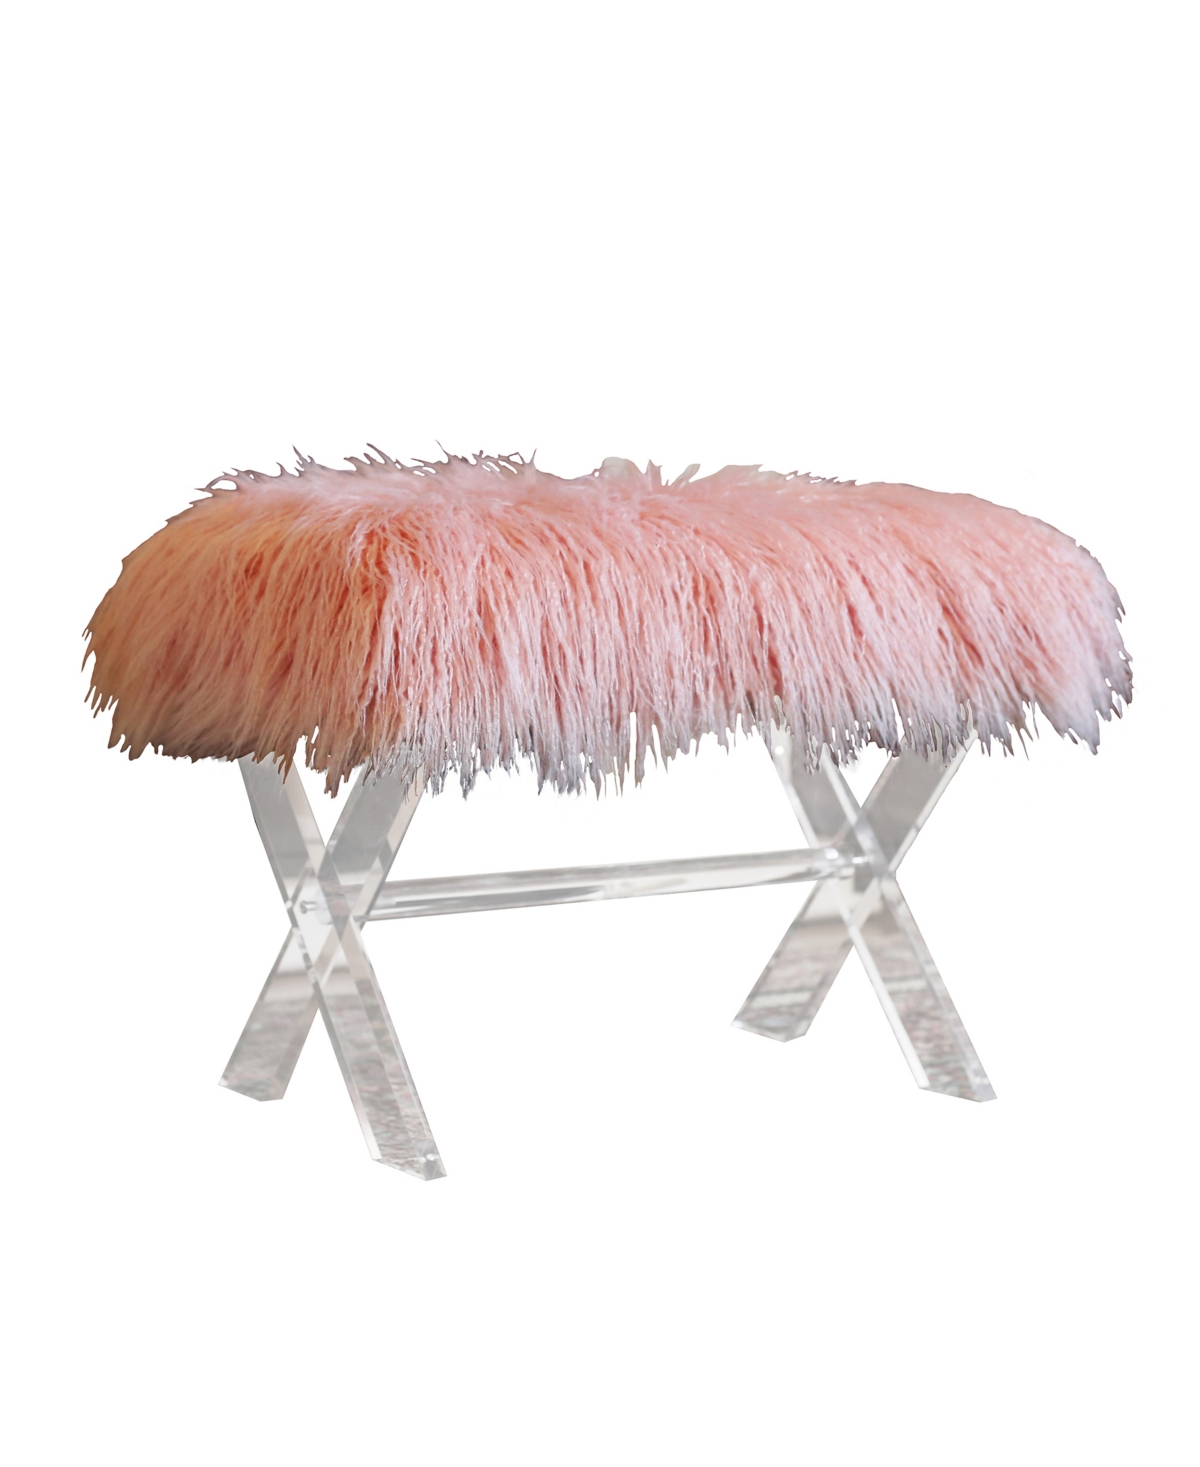 Best Quality Furniture Vanity Ottoman Bench In Pink